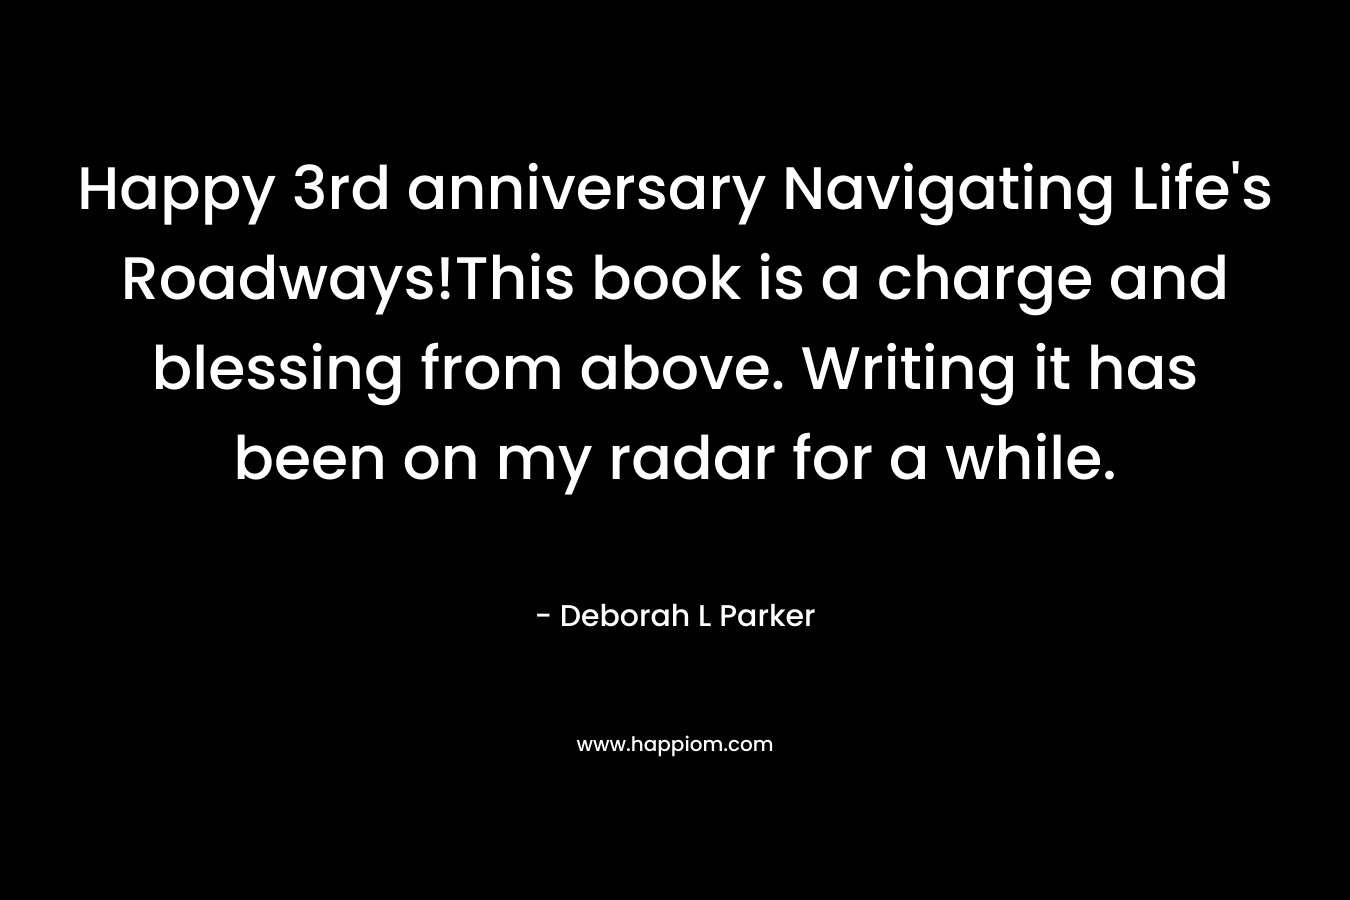 Happy 3rd anniversary Navigating Life’s Roadways!This book is a charge and blessing from above. Writing it has been on my radar for a while. – Deborah L Parker